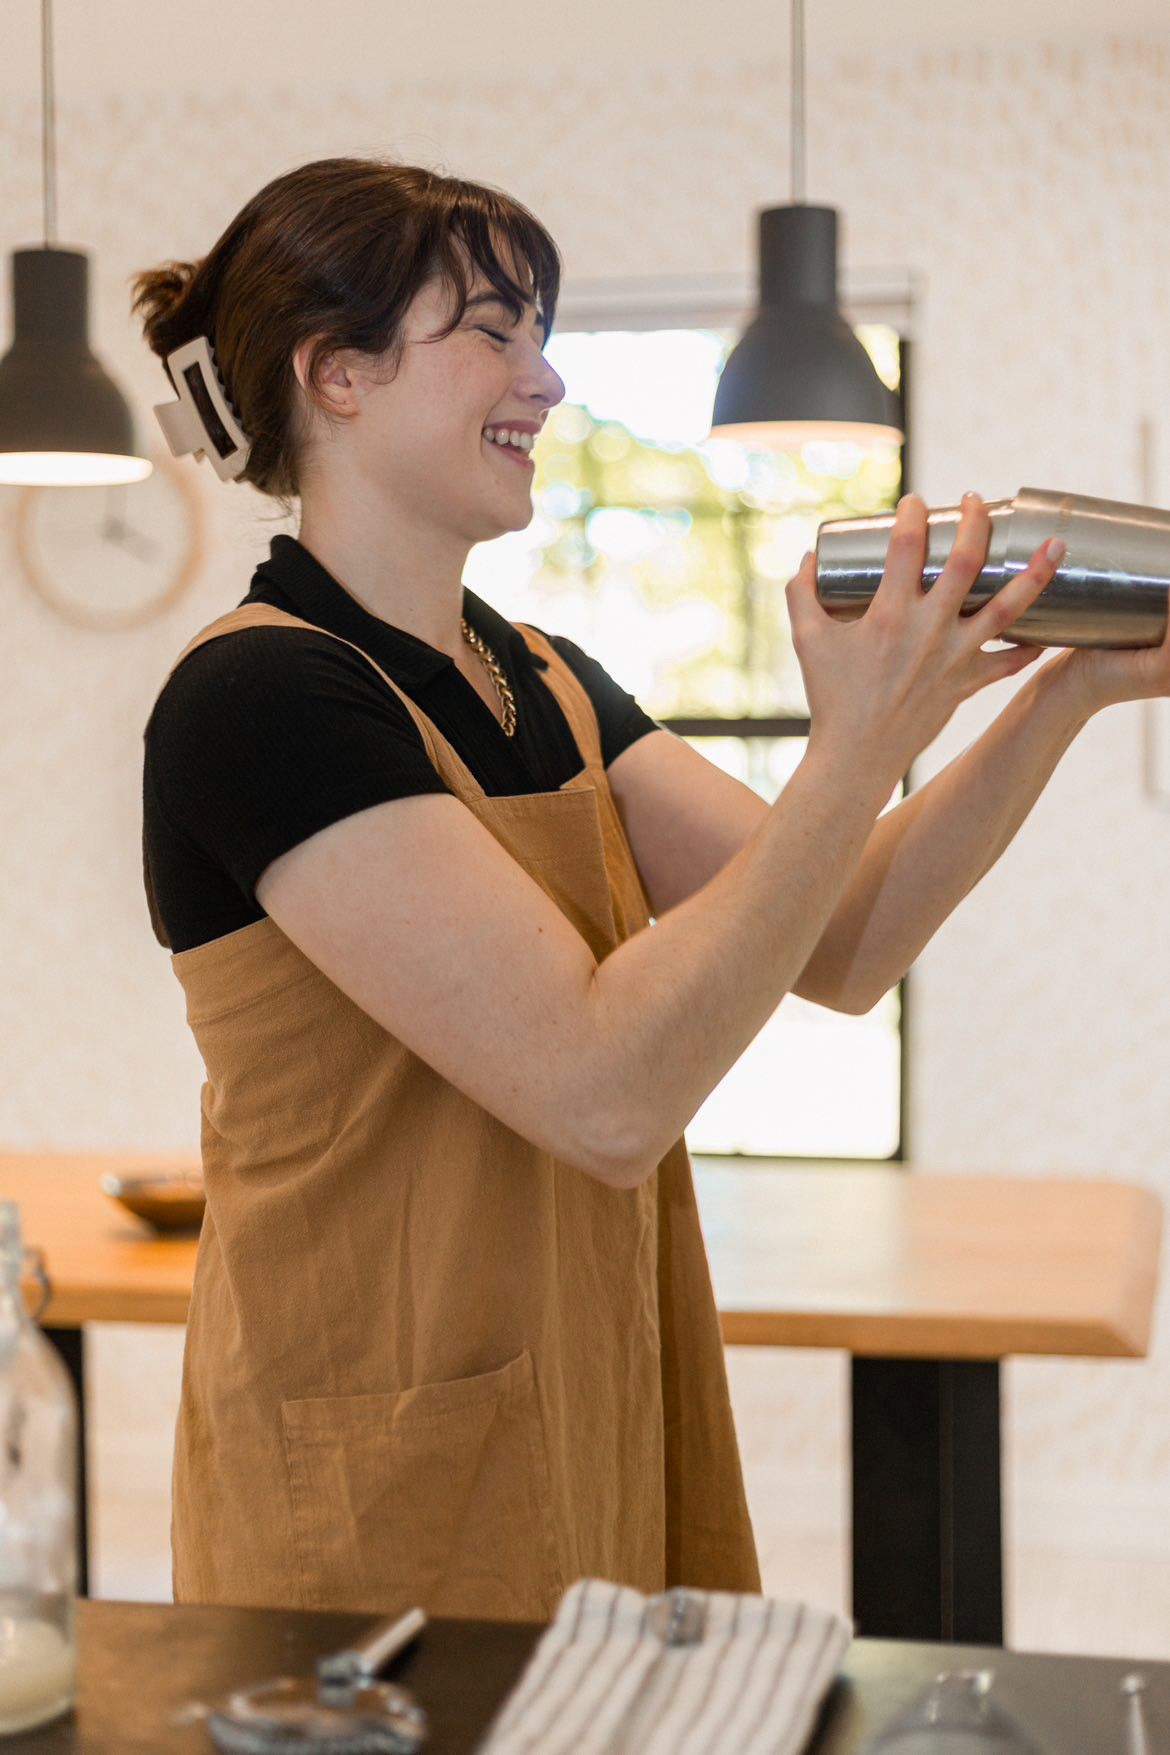 A woman in an apron smiling while making a drink in a shaker.